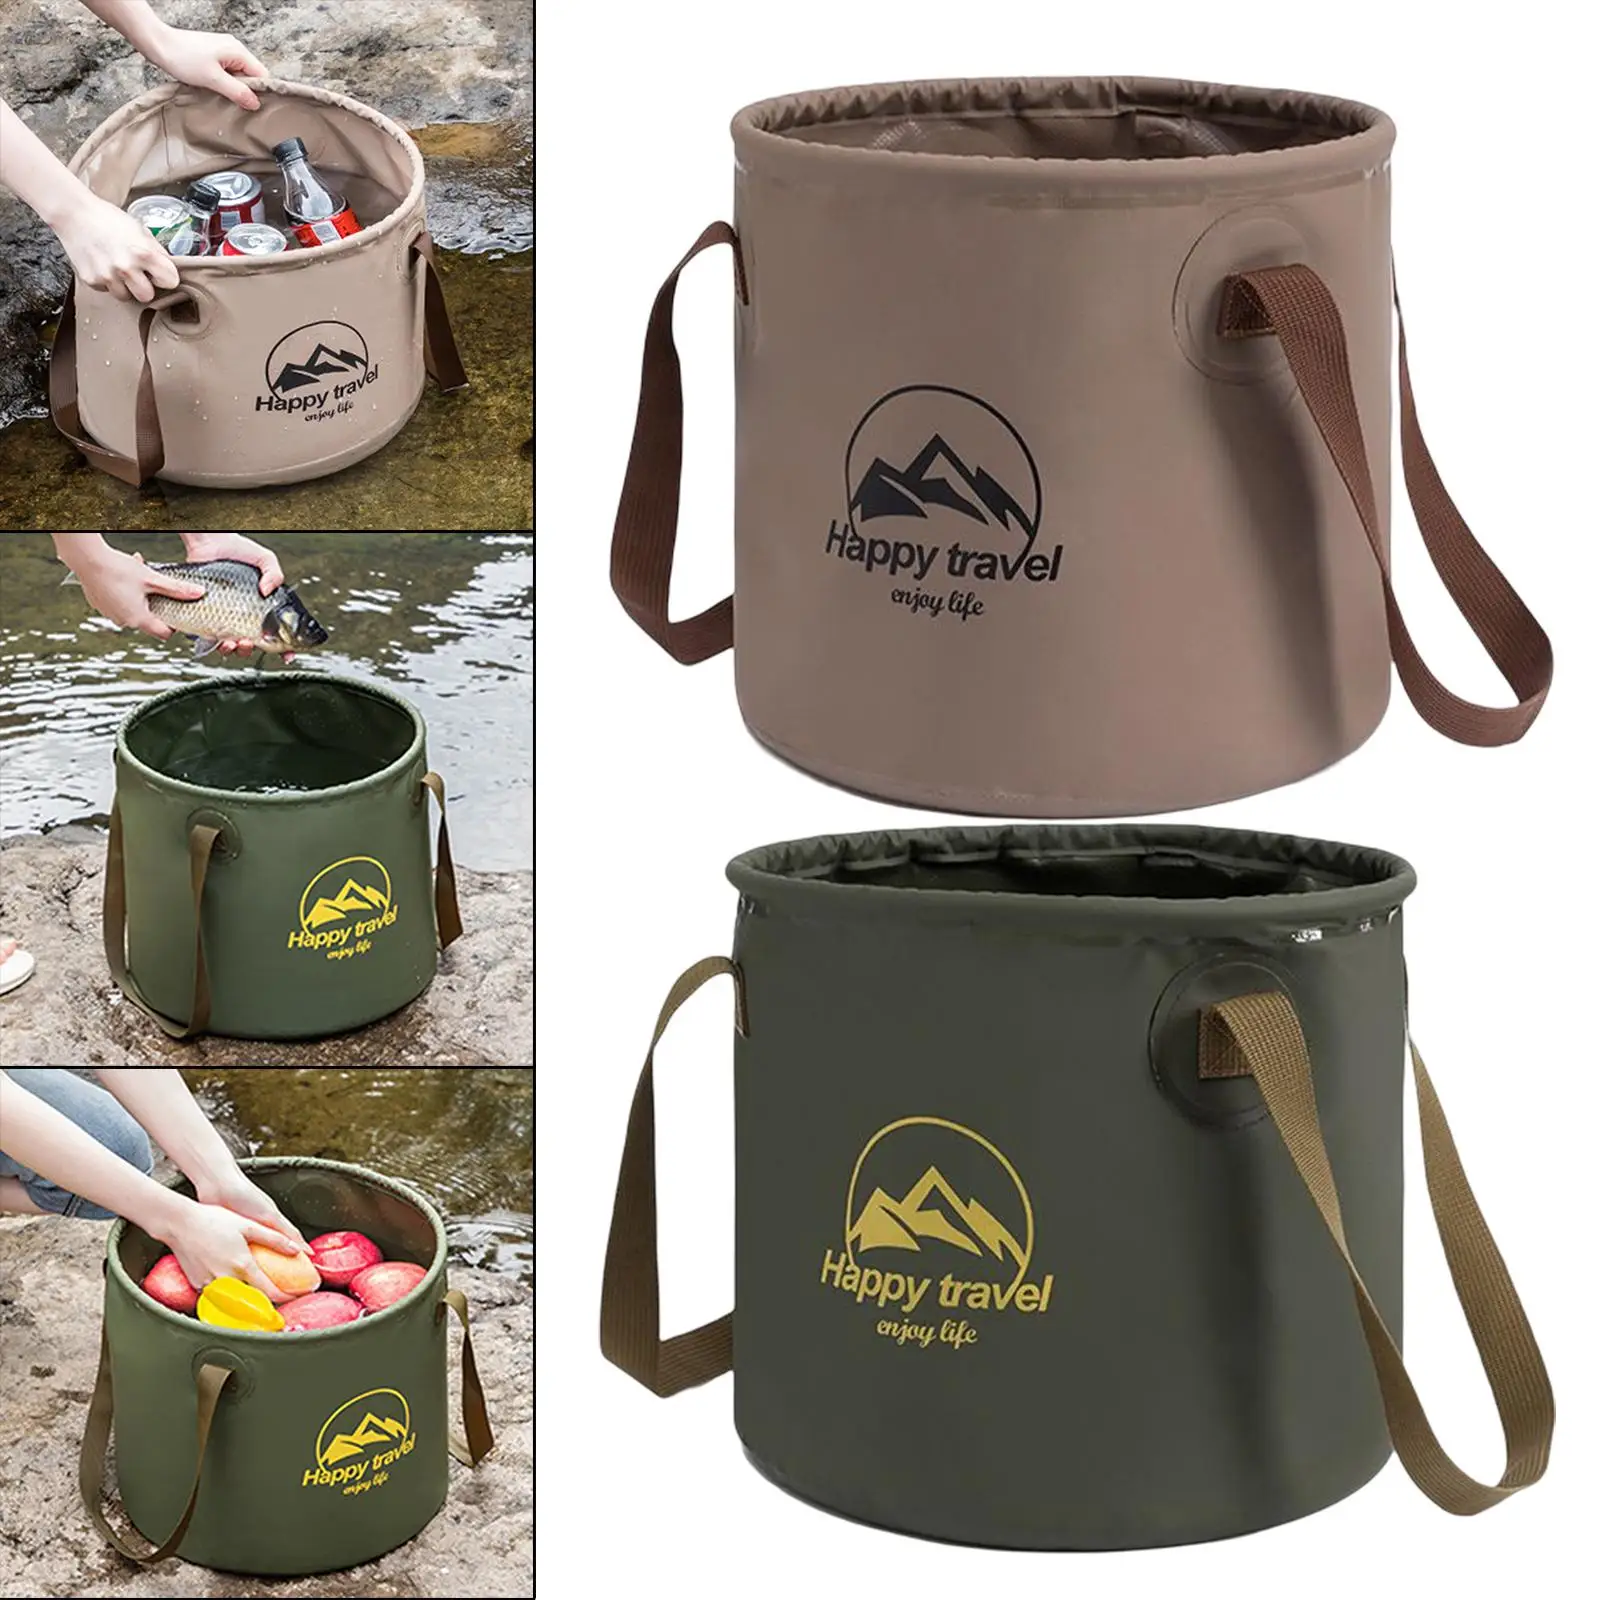 5 Gallon Collapsible Bucket Folding Compact Water Container for Camping